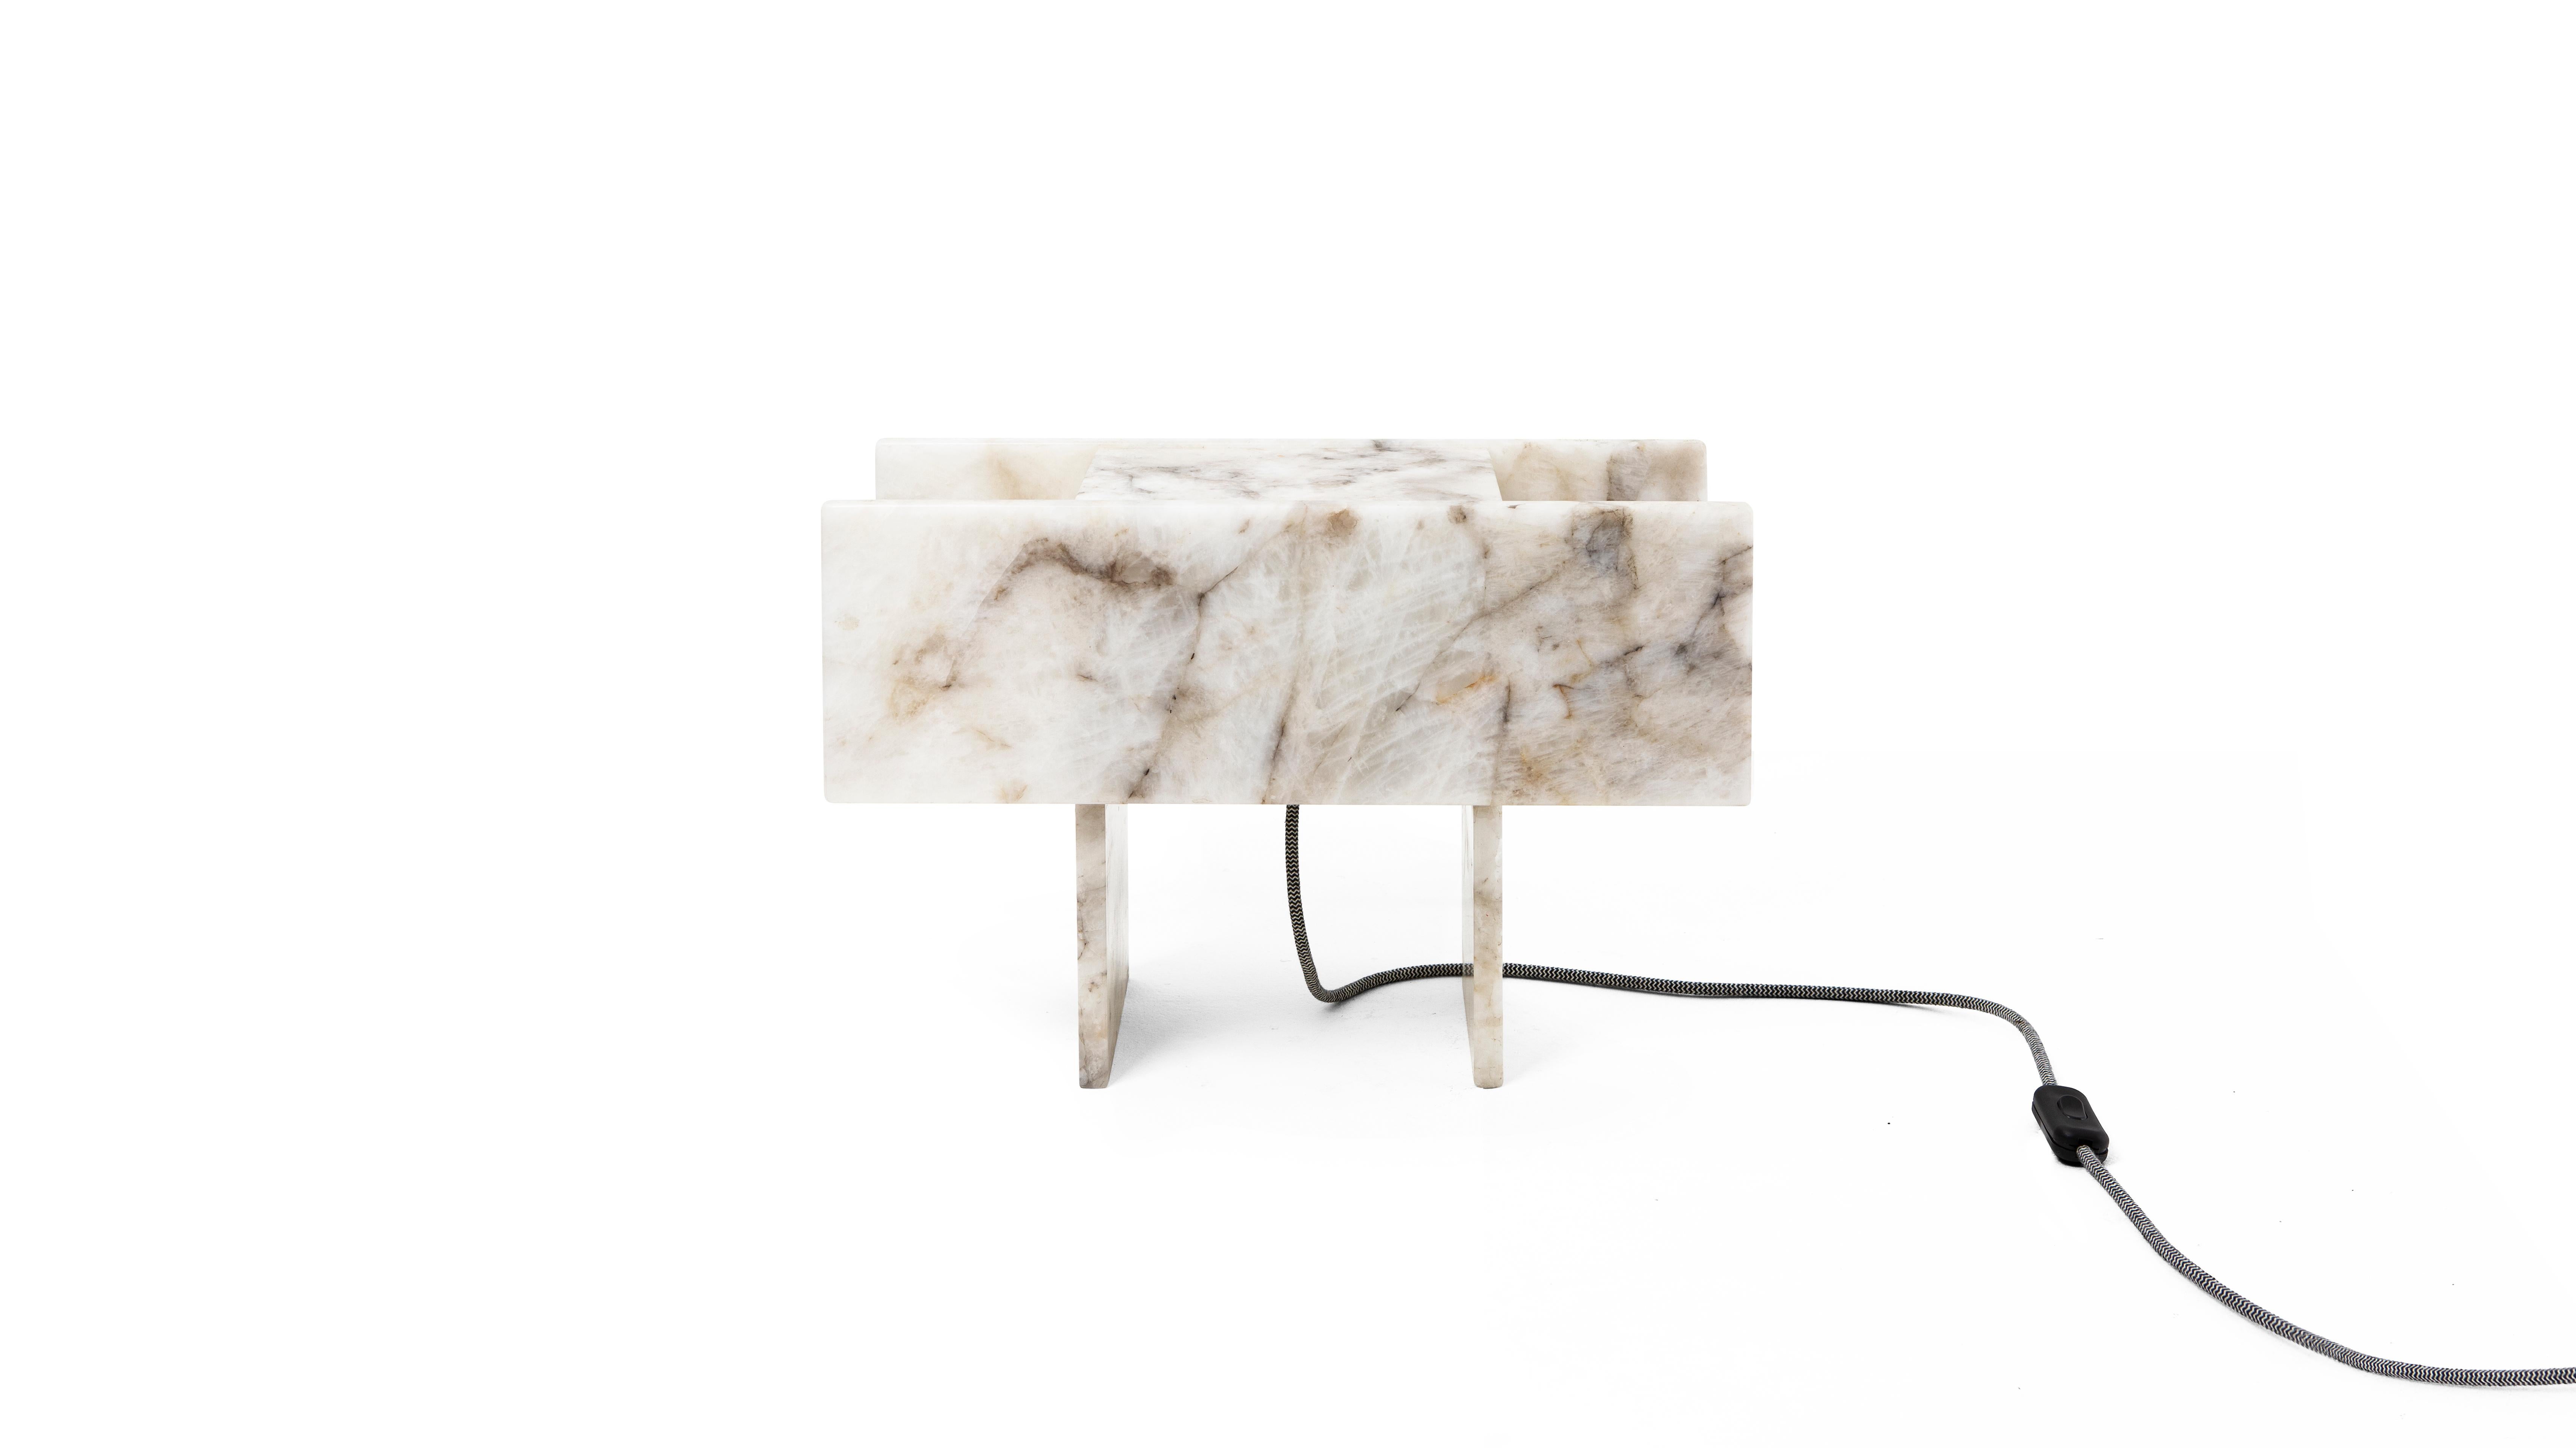 This is Pedrita table lamp (size M)  and is part of Pedrita lamp series.
Pedrita lamp series’ concept is based on an experimentation of Brazilian stones: quartzites and quartz crystals, which are natural, semiprecious and exotic stones found in